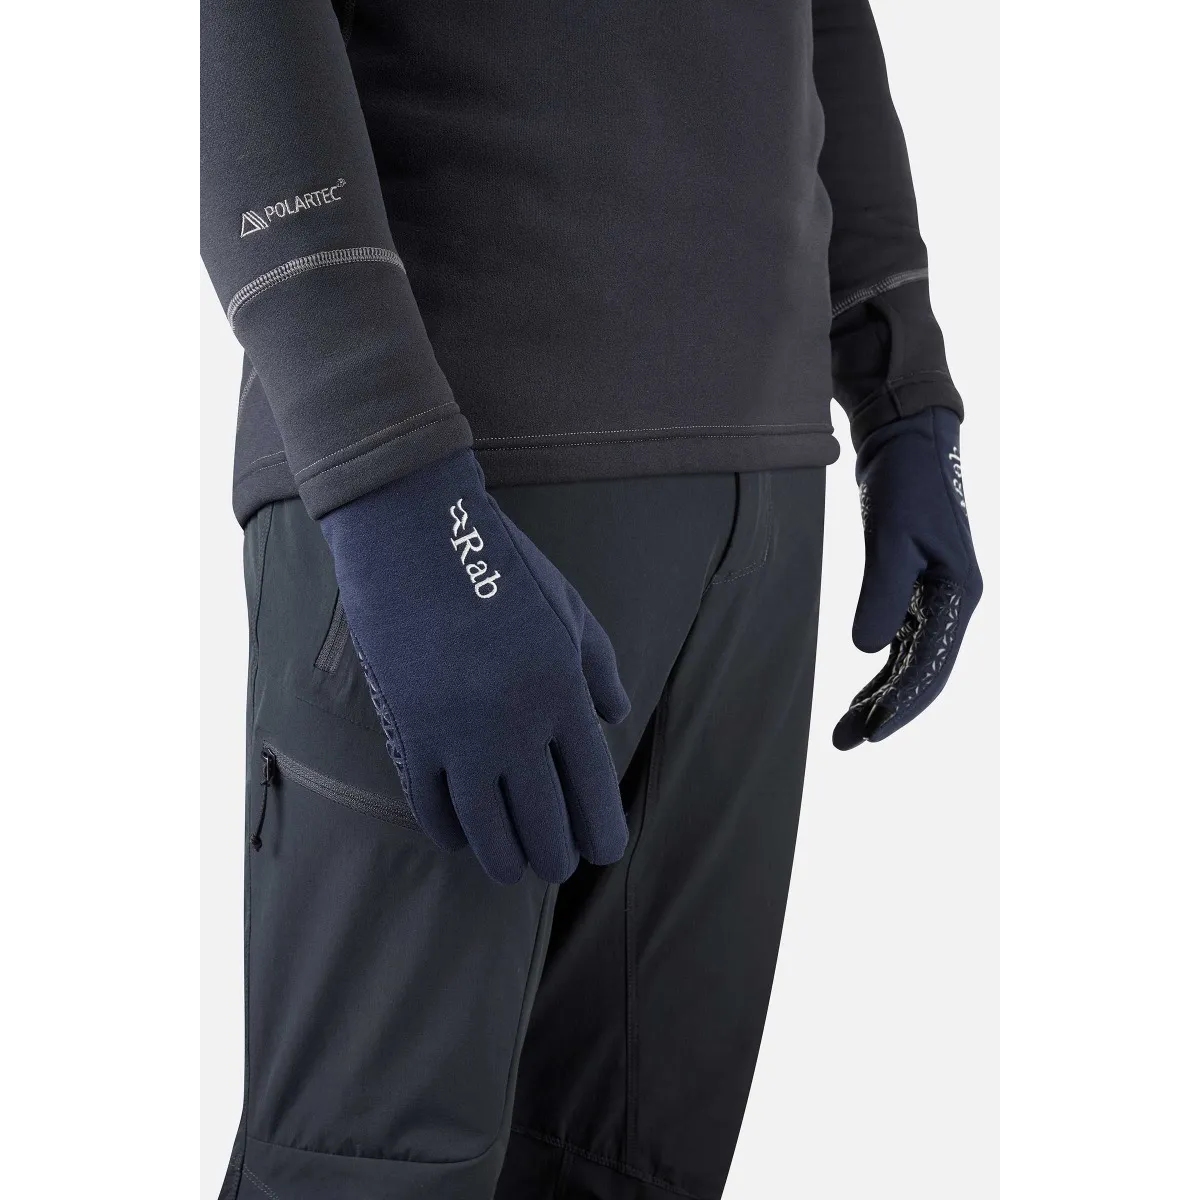 Rab, Power Stretch, Contact, Grip, Glove